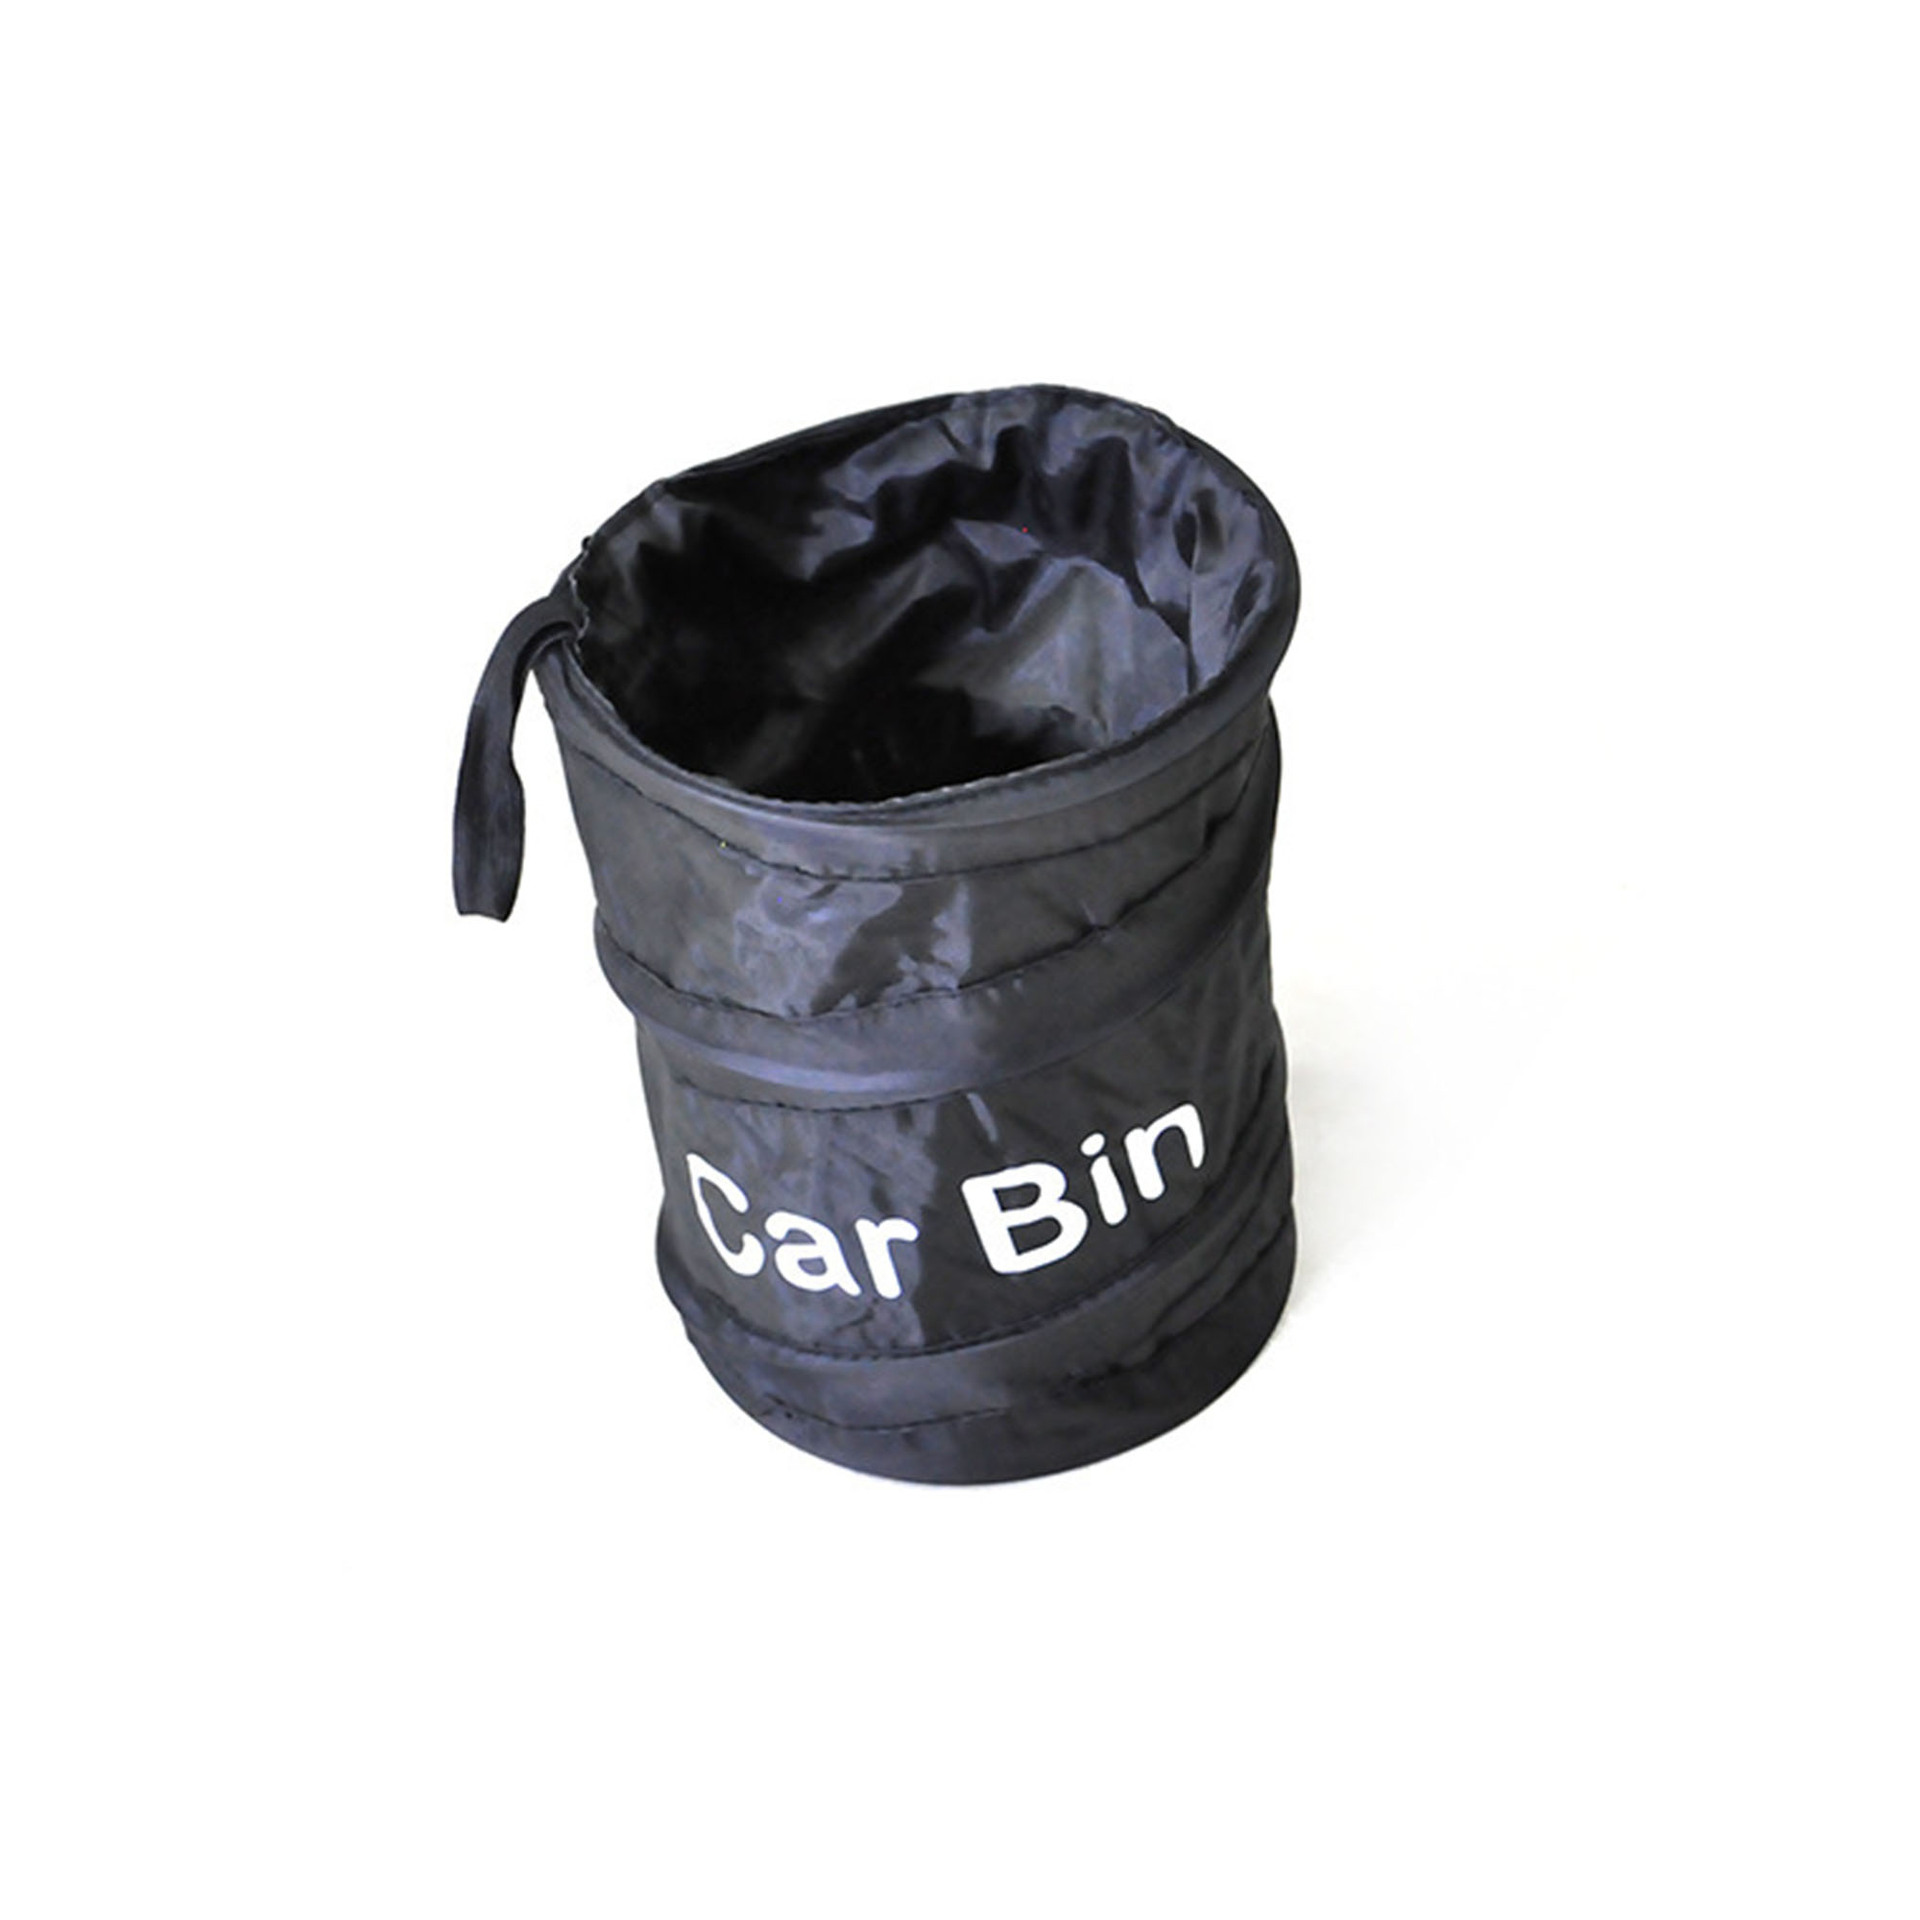 Universal Traveling Portable Car Trash Can Black Collapsible Pop up Leak  Proof Trash Can for Garbage to Organize Car, Waste Basket Bin, Rubbish  Bucket,6.3 x7.9inches 